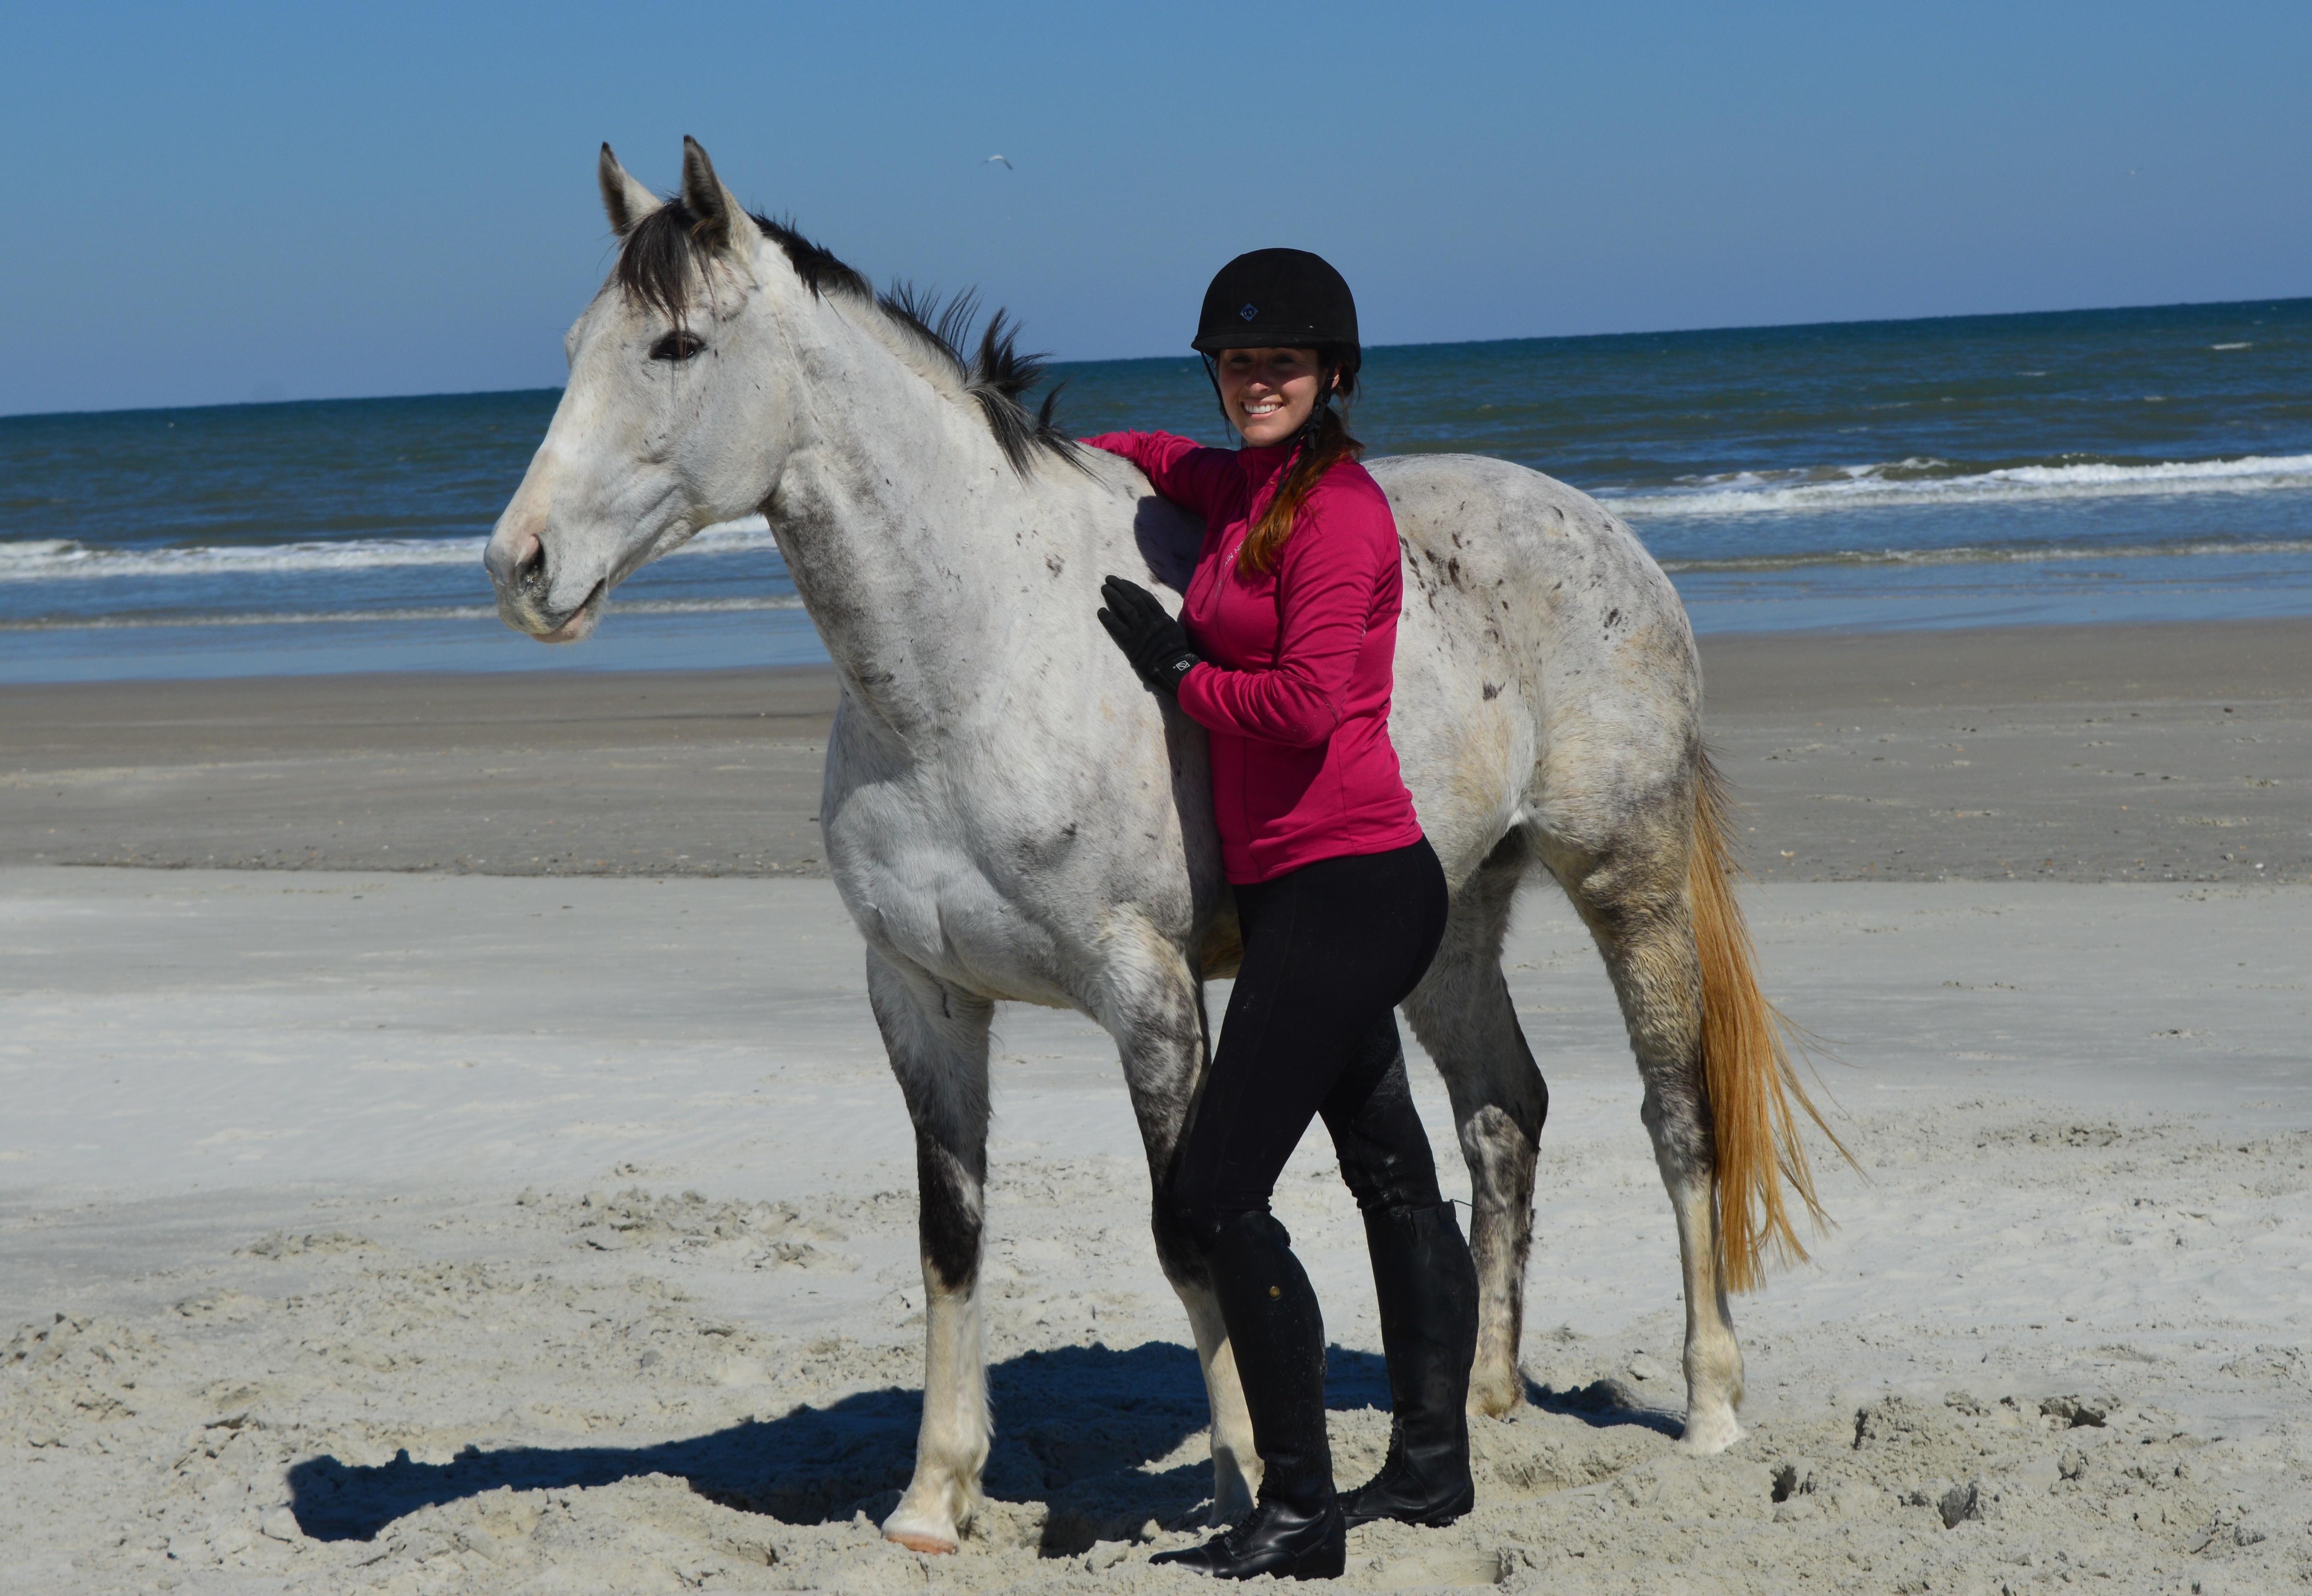 Lindsey with 'Soar' her 2015 Thoroughbred Makeover winner at the beach in Florida during a photo shoot.